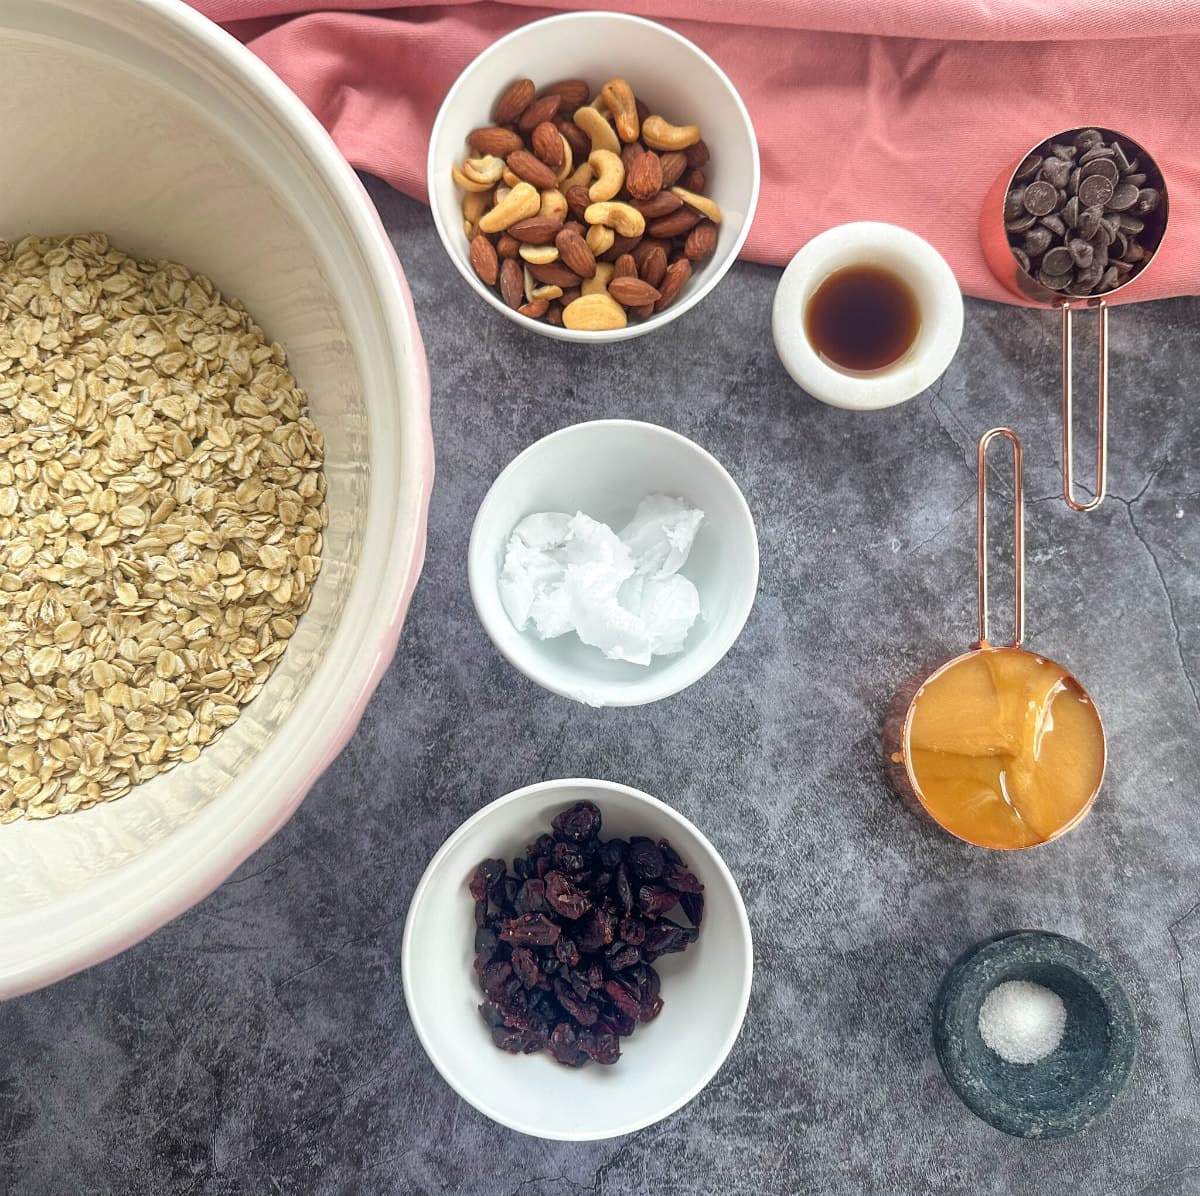 Ingredients required to make homemade toasted muesli